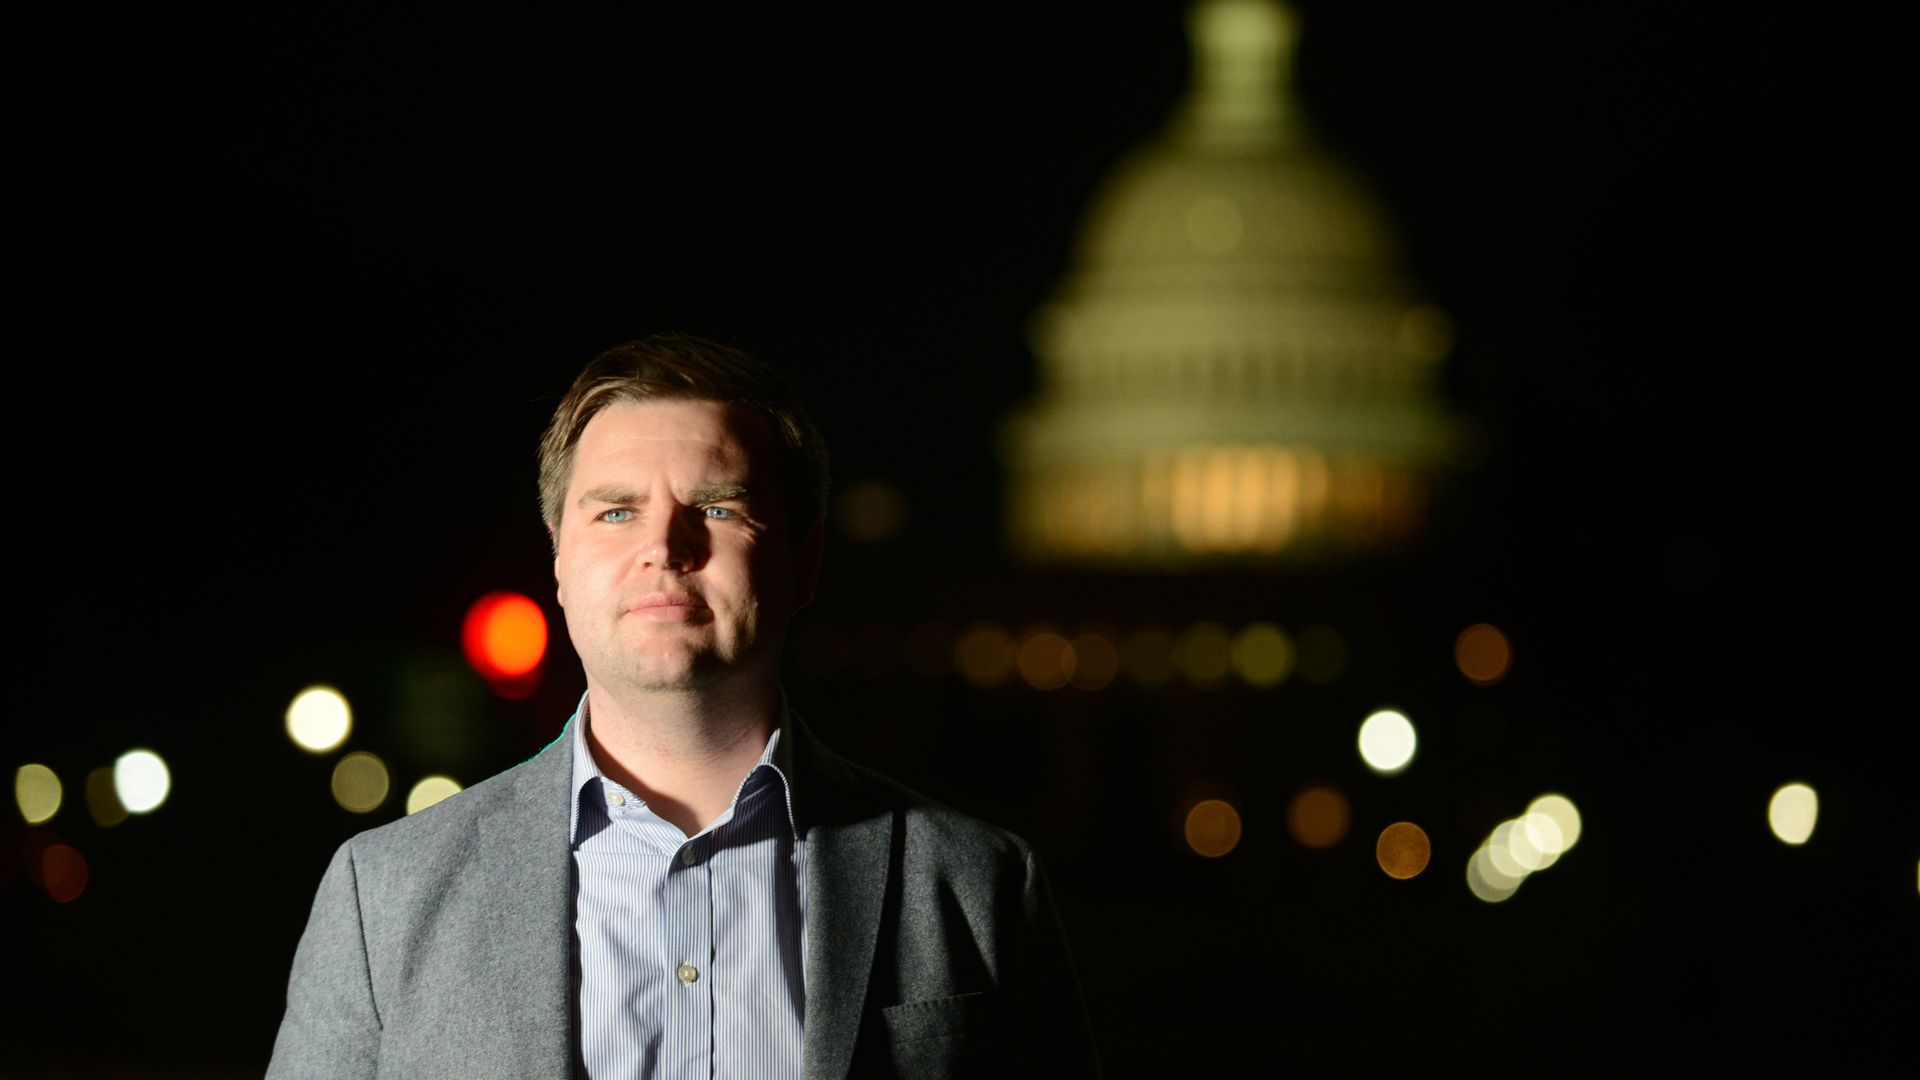 J.D. Vance, author of the book "Hillbilly Elegy," poses for a portrait photograph near the US Capitol building in Washington, D.C., January 27, 2017. 